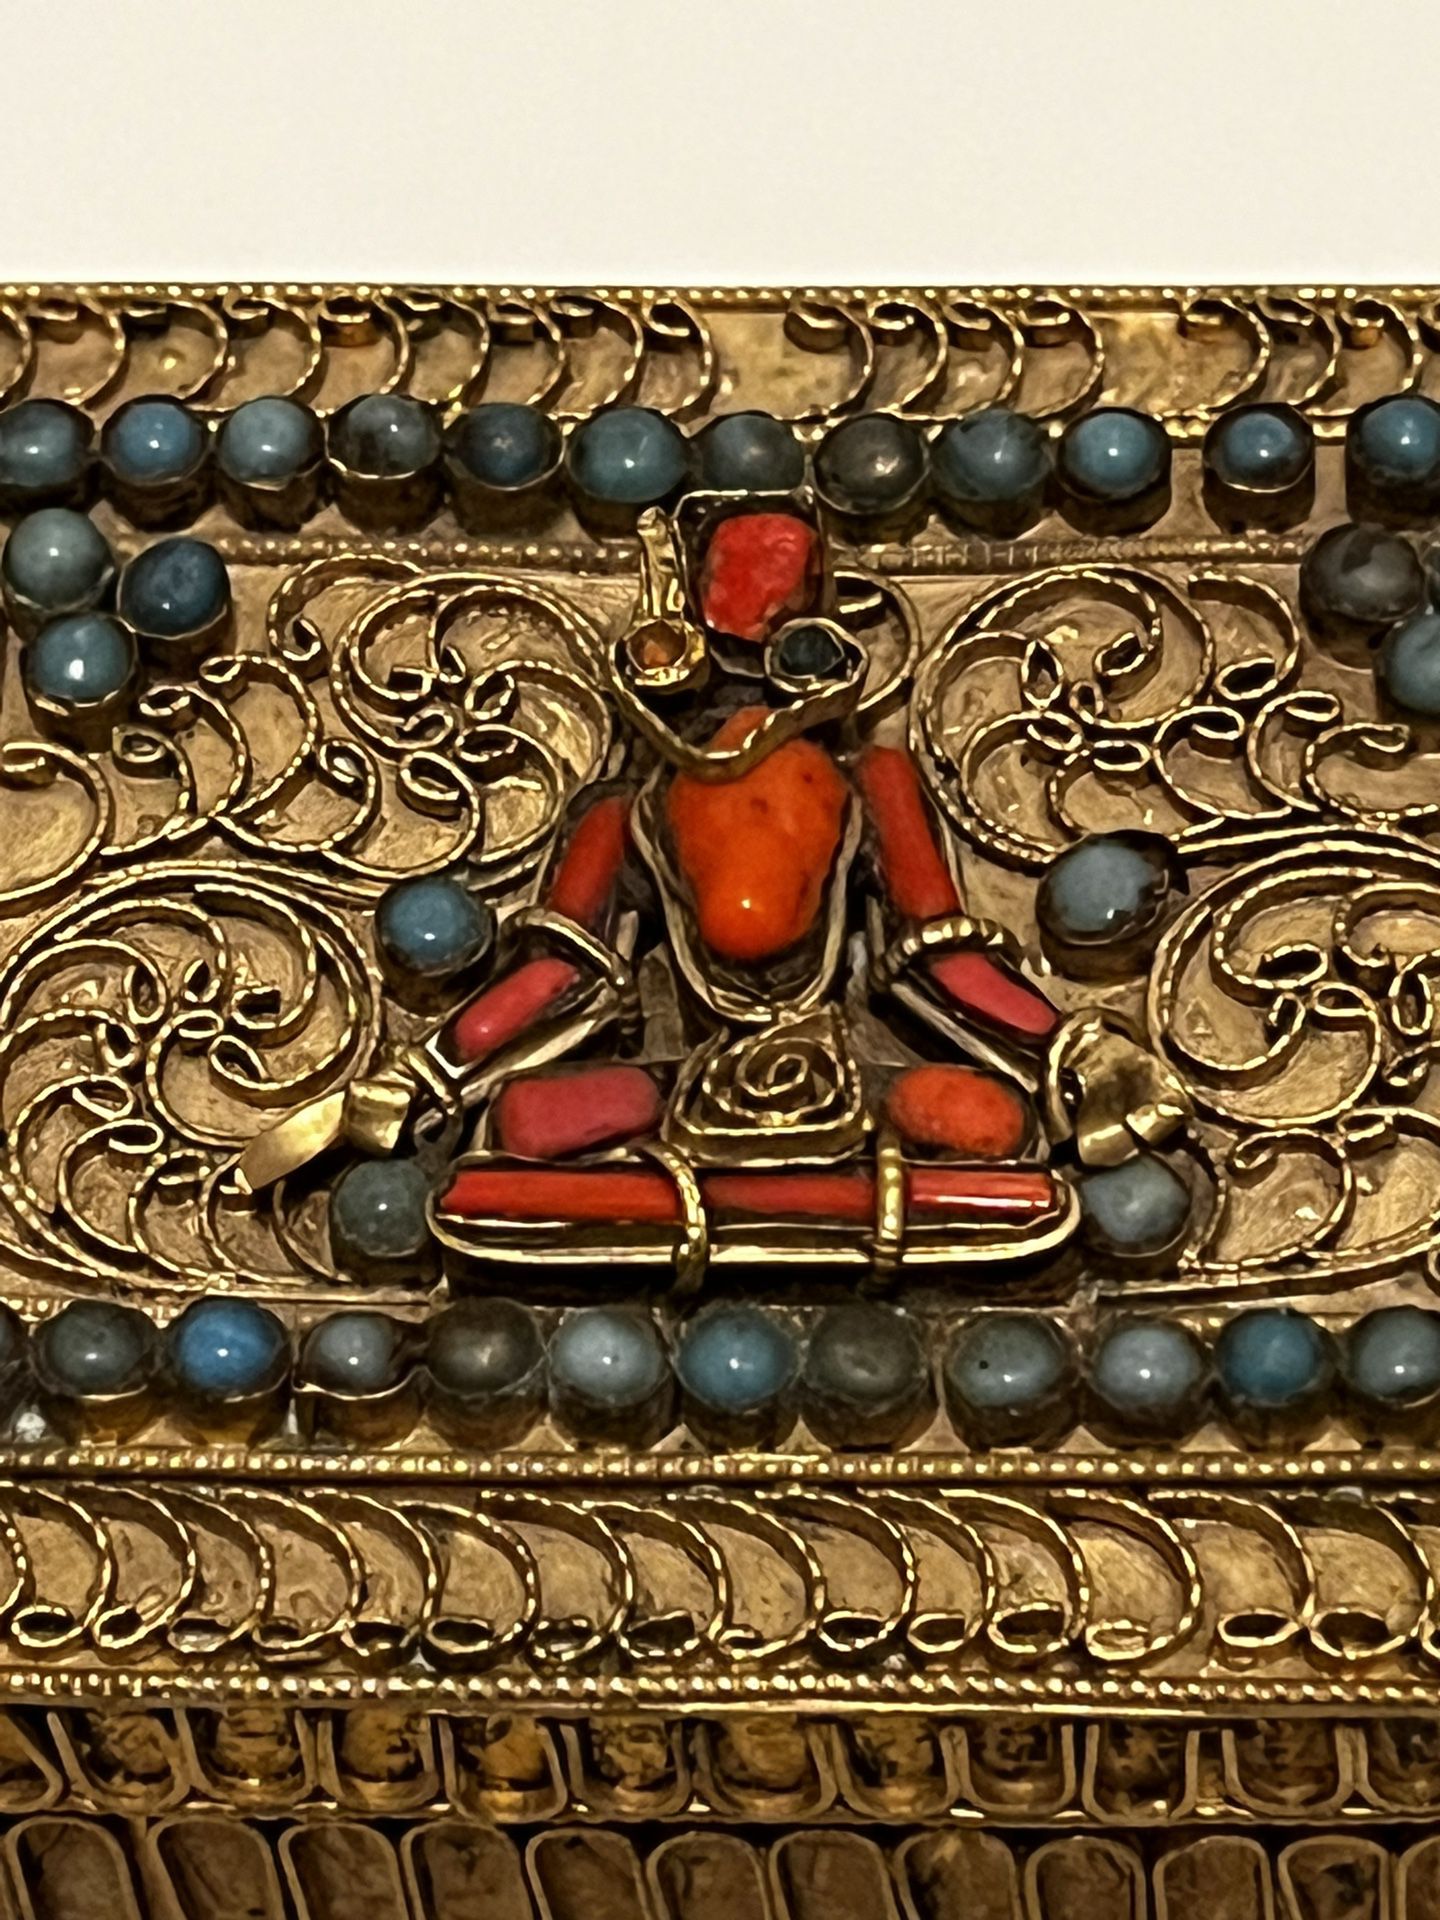 Antique Tibetan Gilded Box with Inlaid Ornate Turquoise & Coral Buddha on Lid 